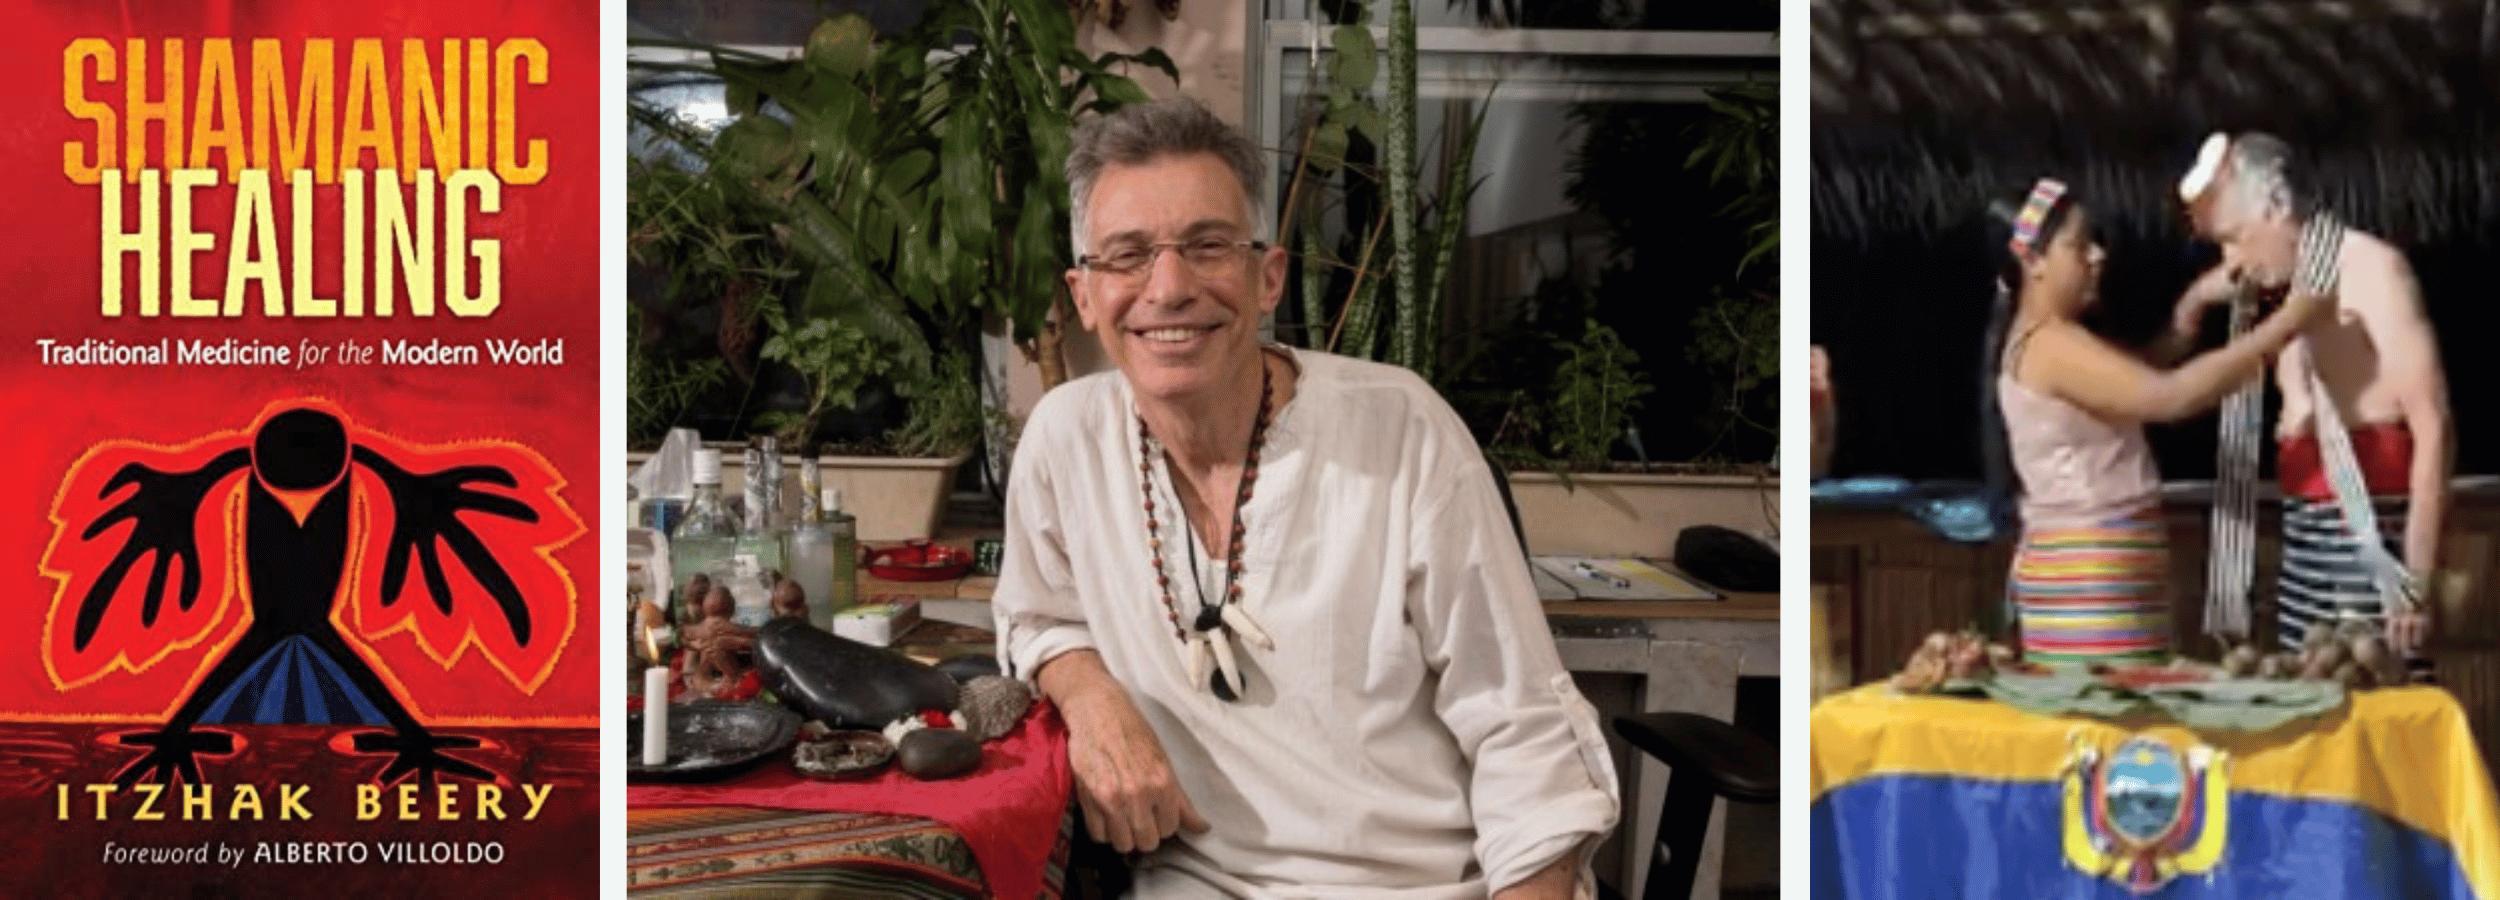 hamanic Healing: Traditional Medicine for the Modern World by Itzhak Beery, profile pictures of Itzhak Beery